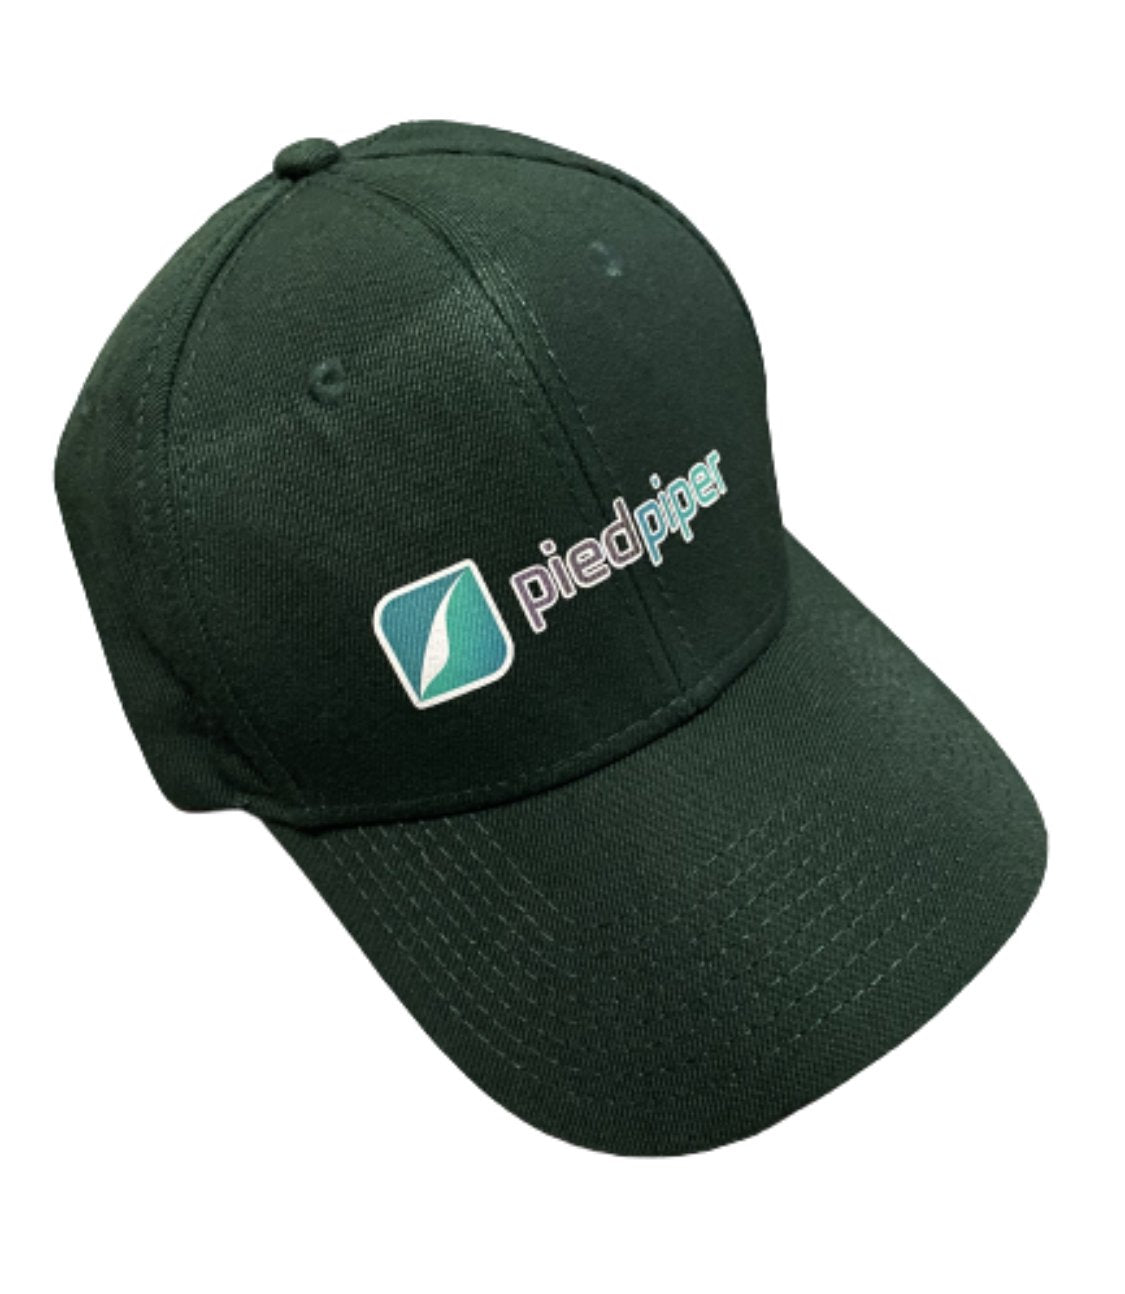 SILICON VALLEY: Jian Yang’s Pied Piper 4.0 Snapback